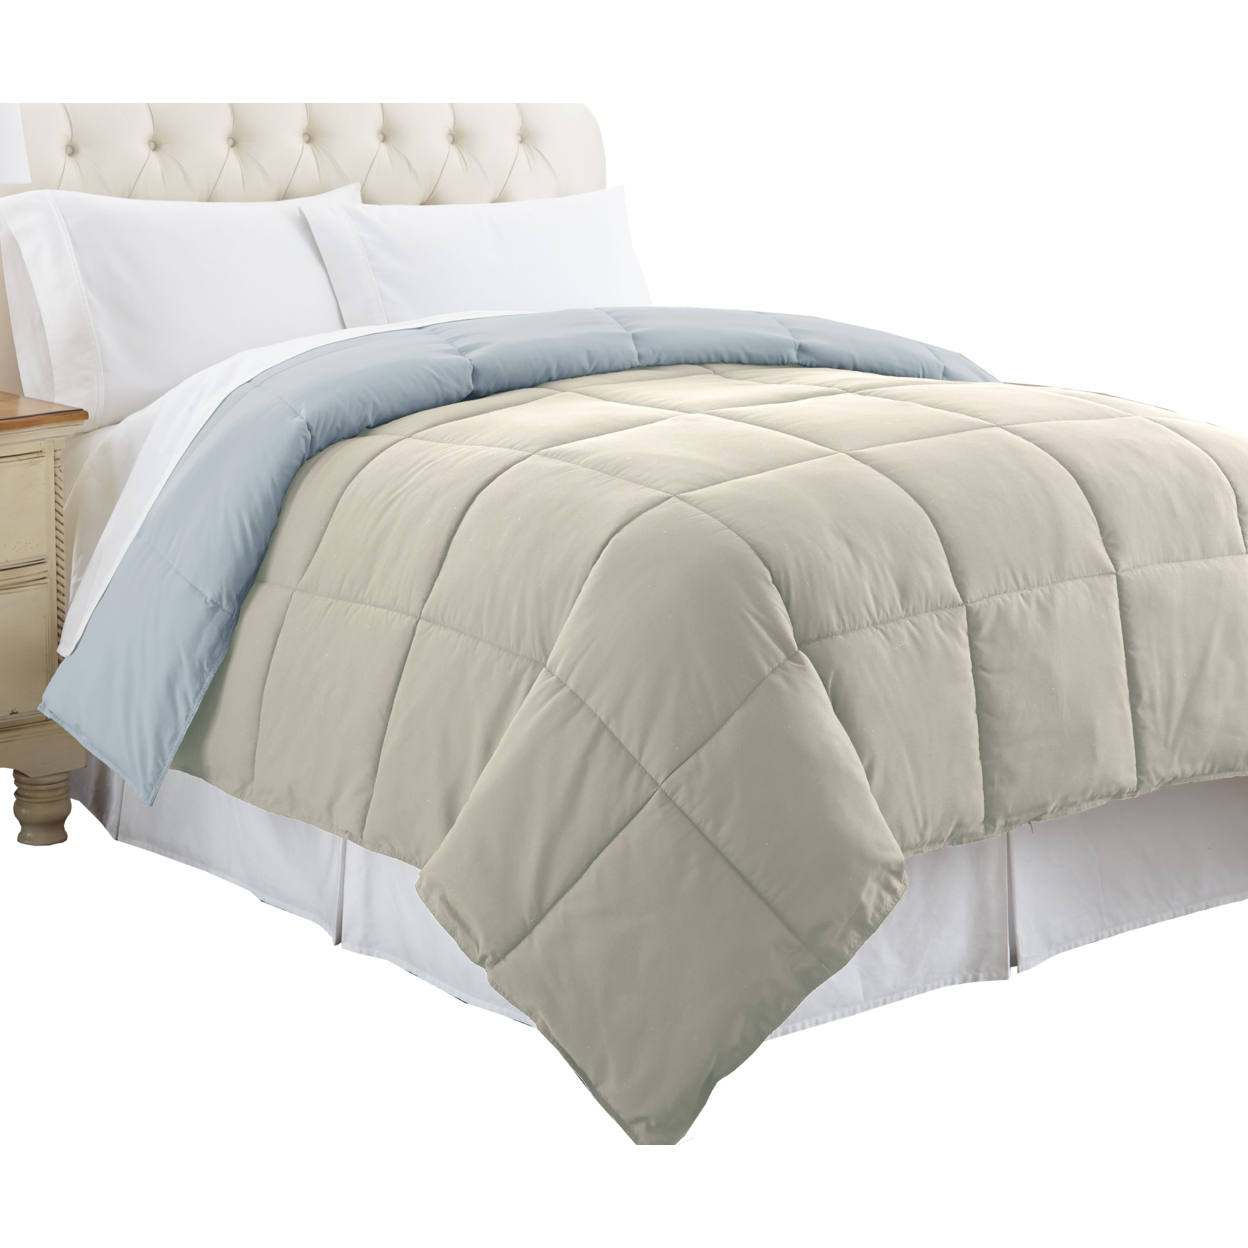 Genoa Twin Size Box Quilted Reversible Comforter The Urban Port, Gray And Blue- Saltoro Sherpi